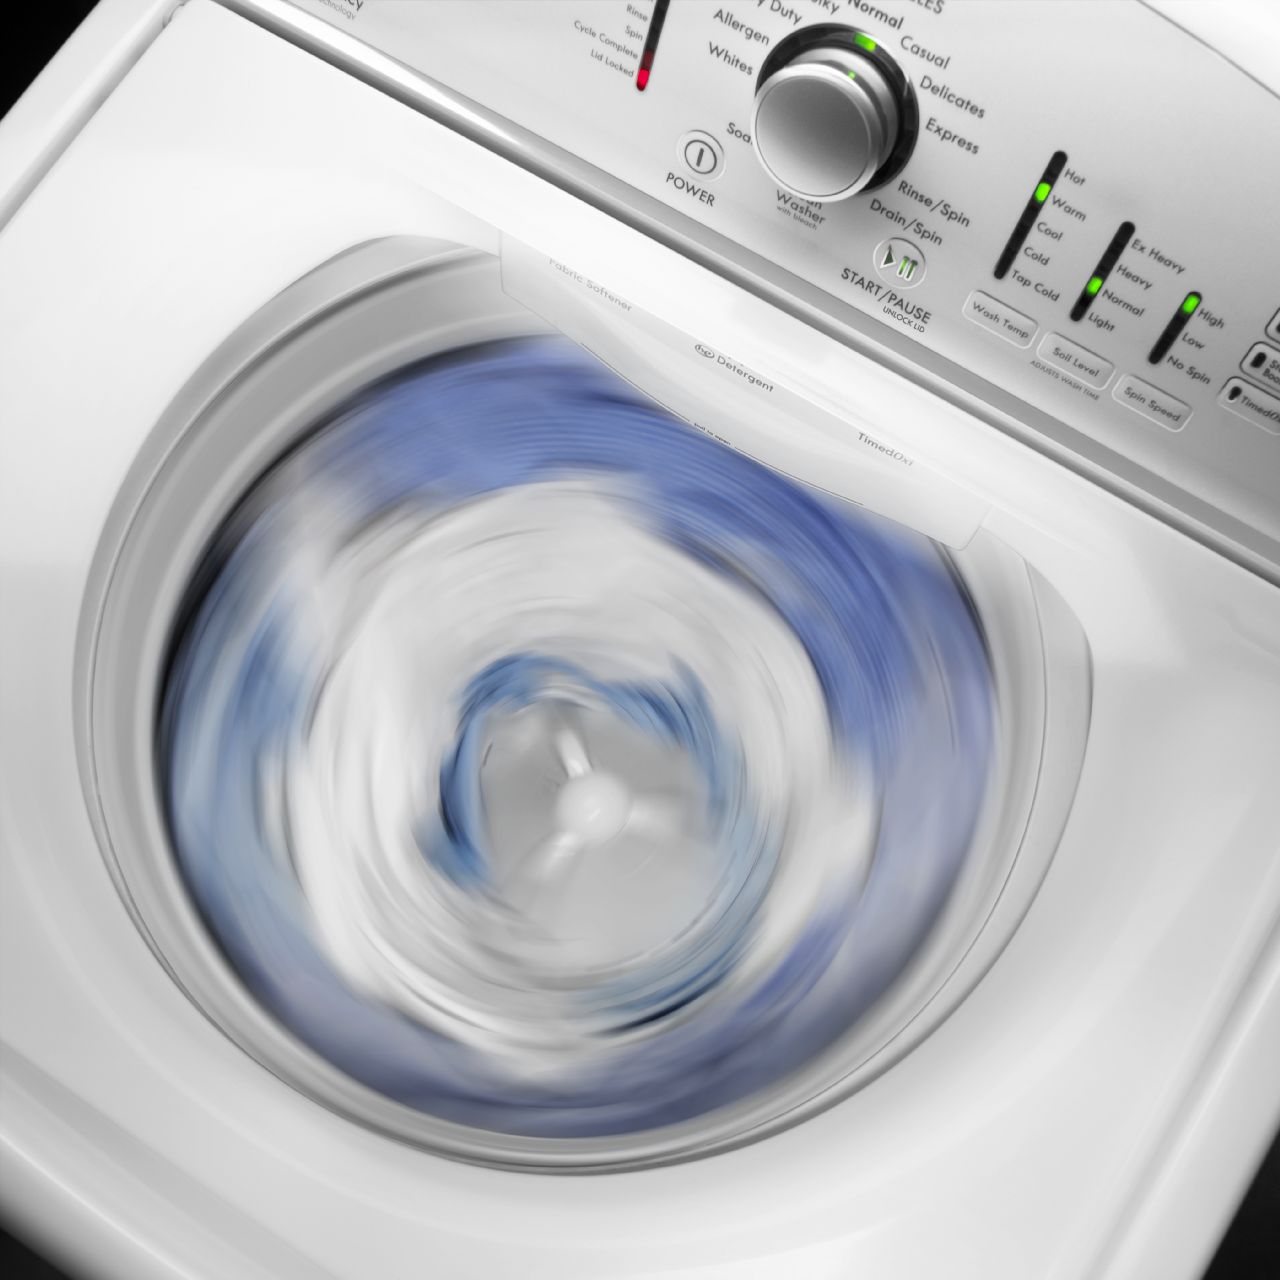 Featured image for “Why Won’t My Washing Machine Stop Spinning?”